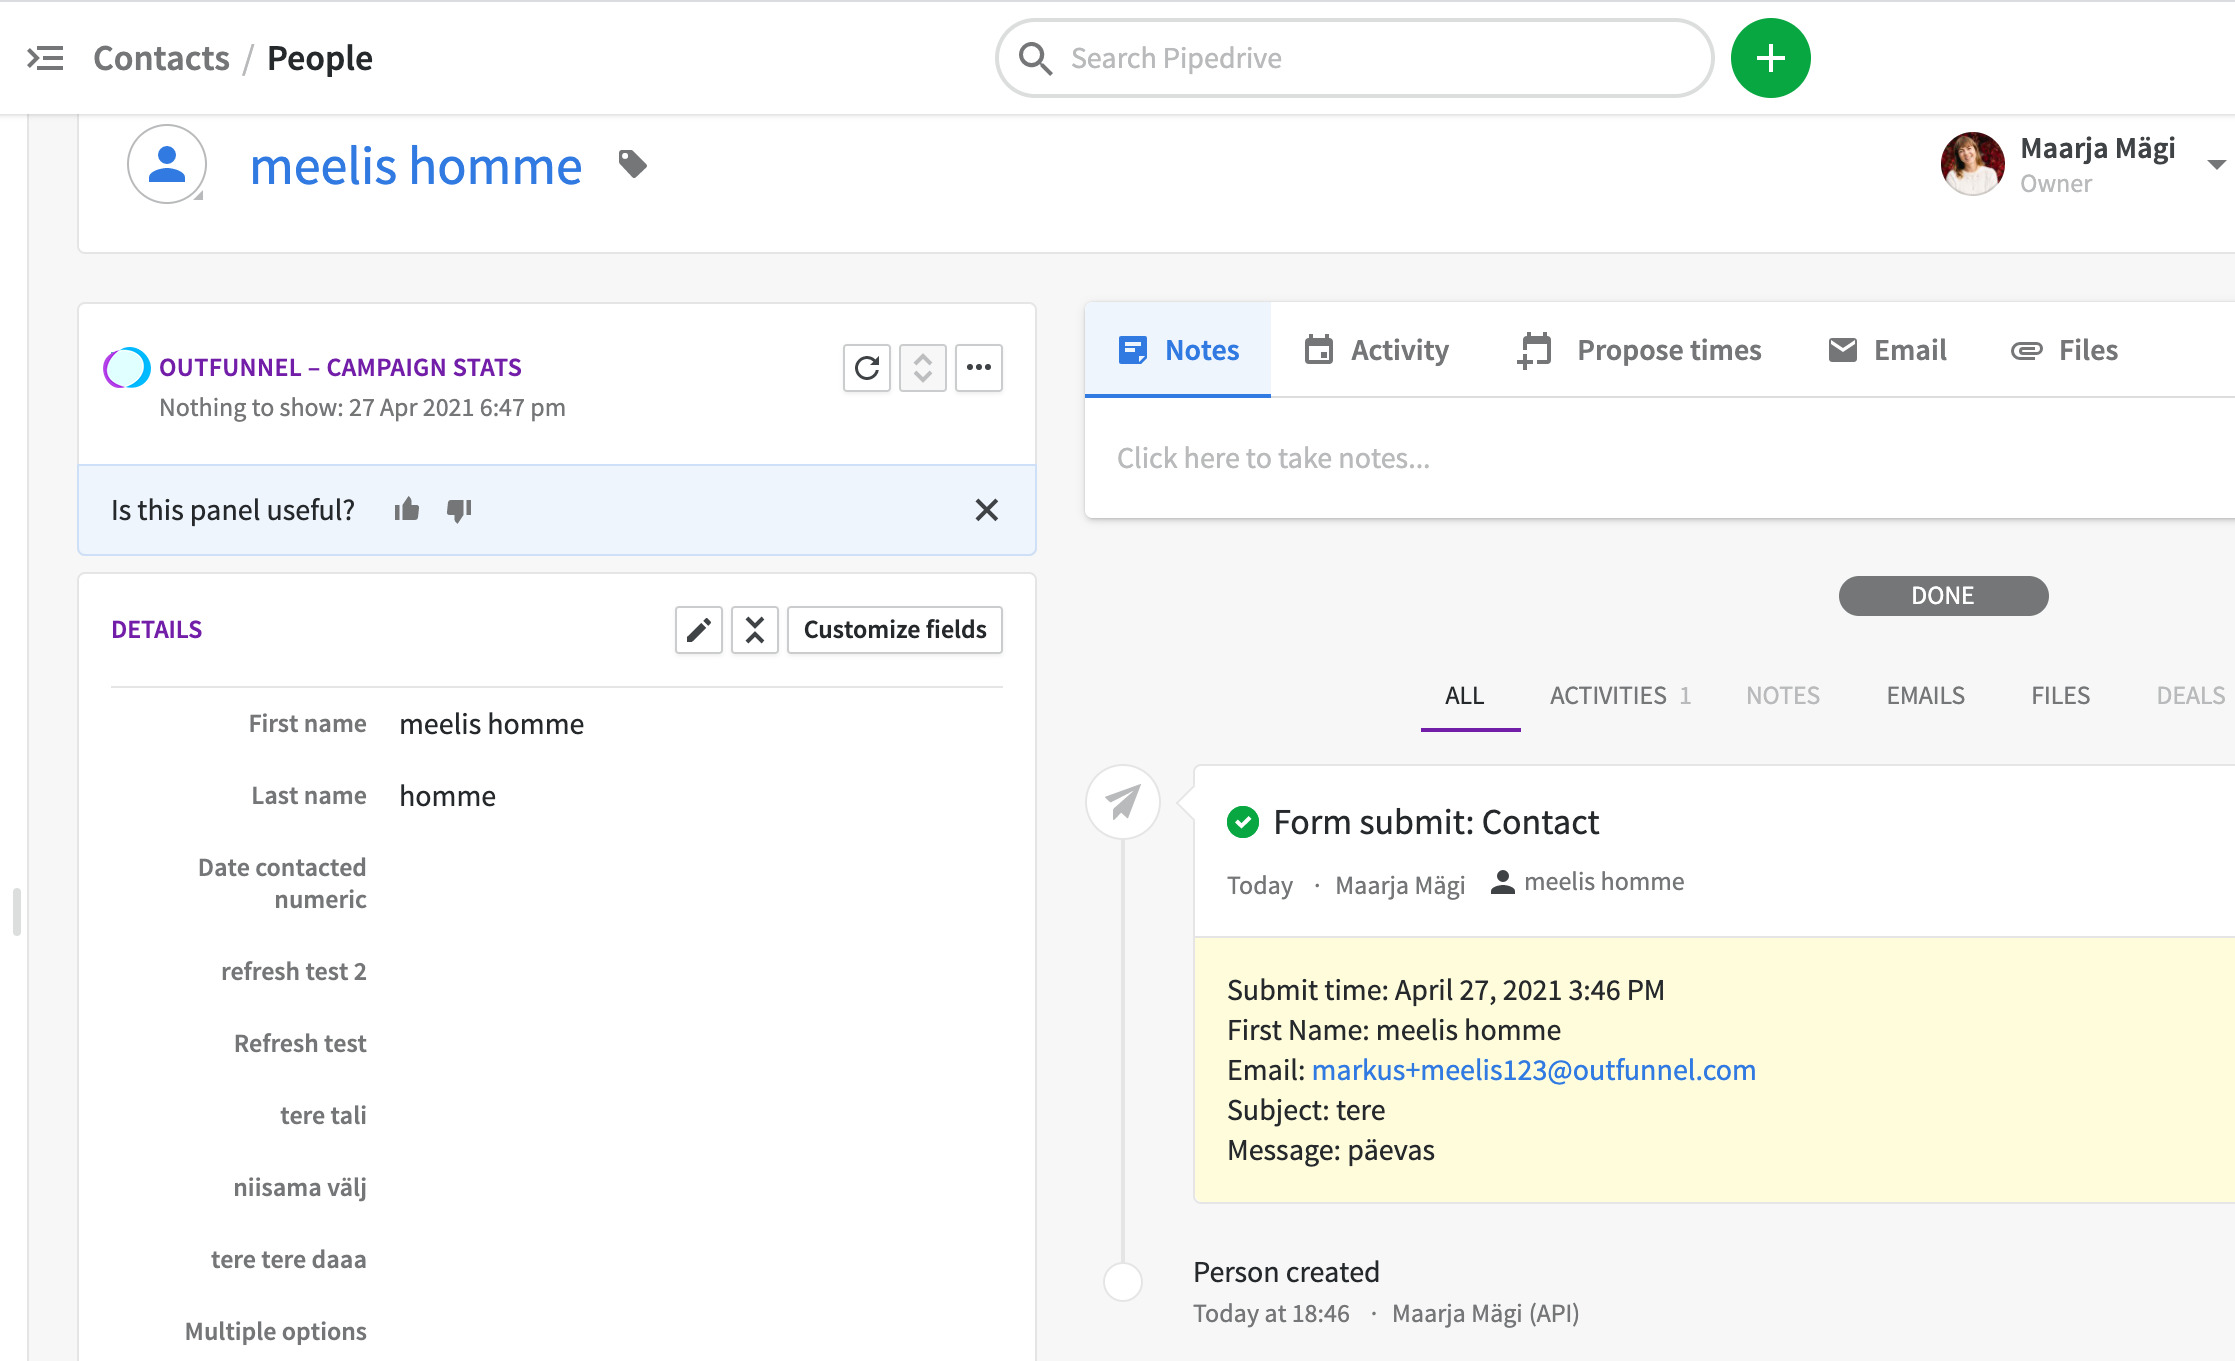 create contacts in pipedrive from forms submissions